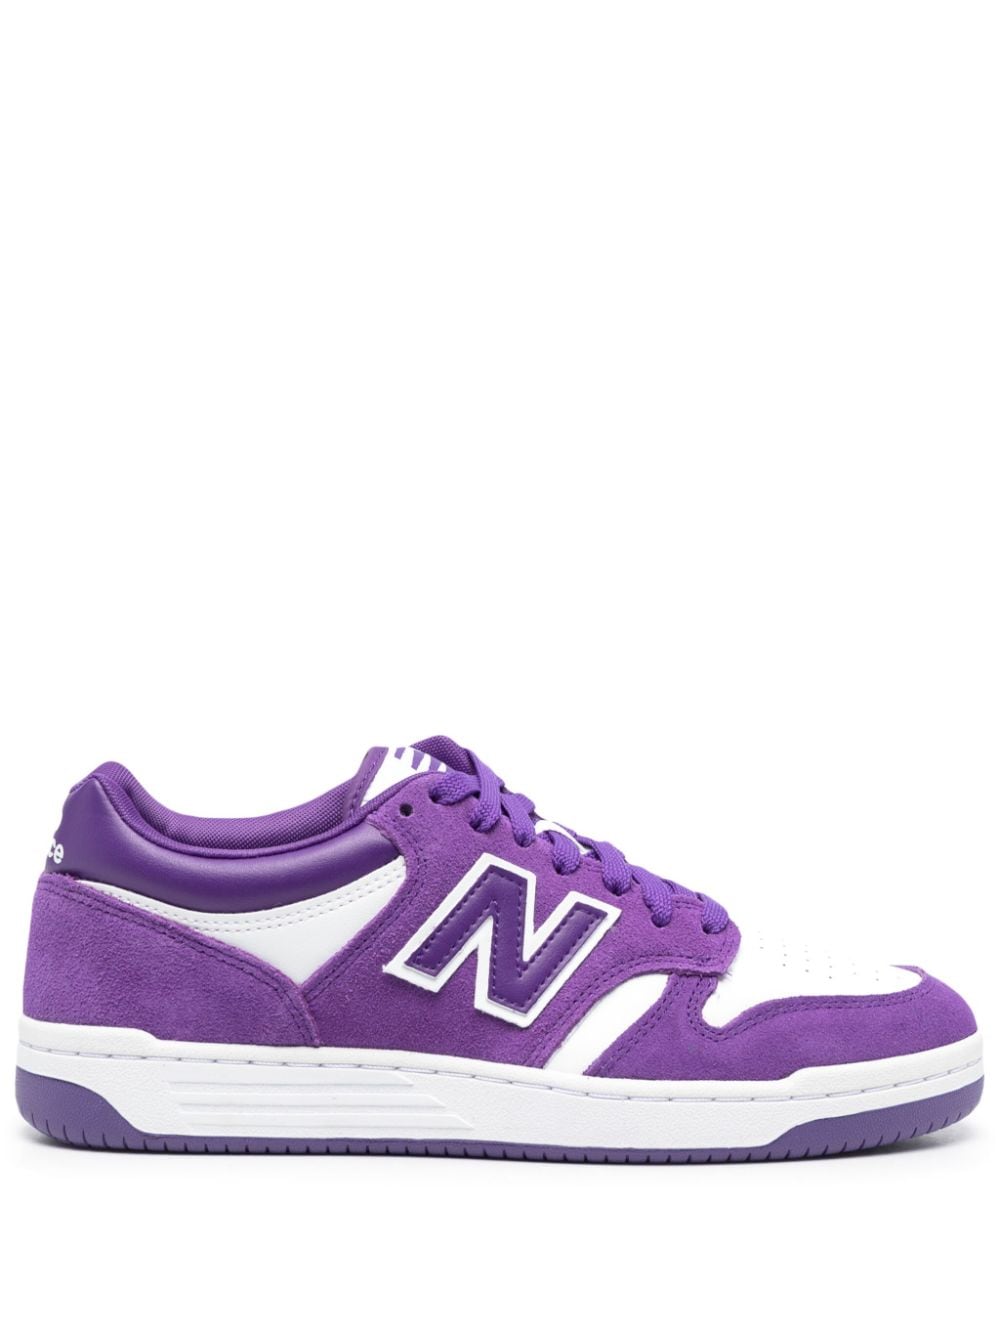 New Balance 480 suede sneakers - Purple